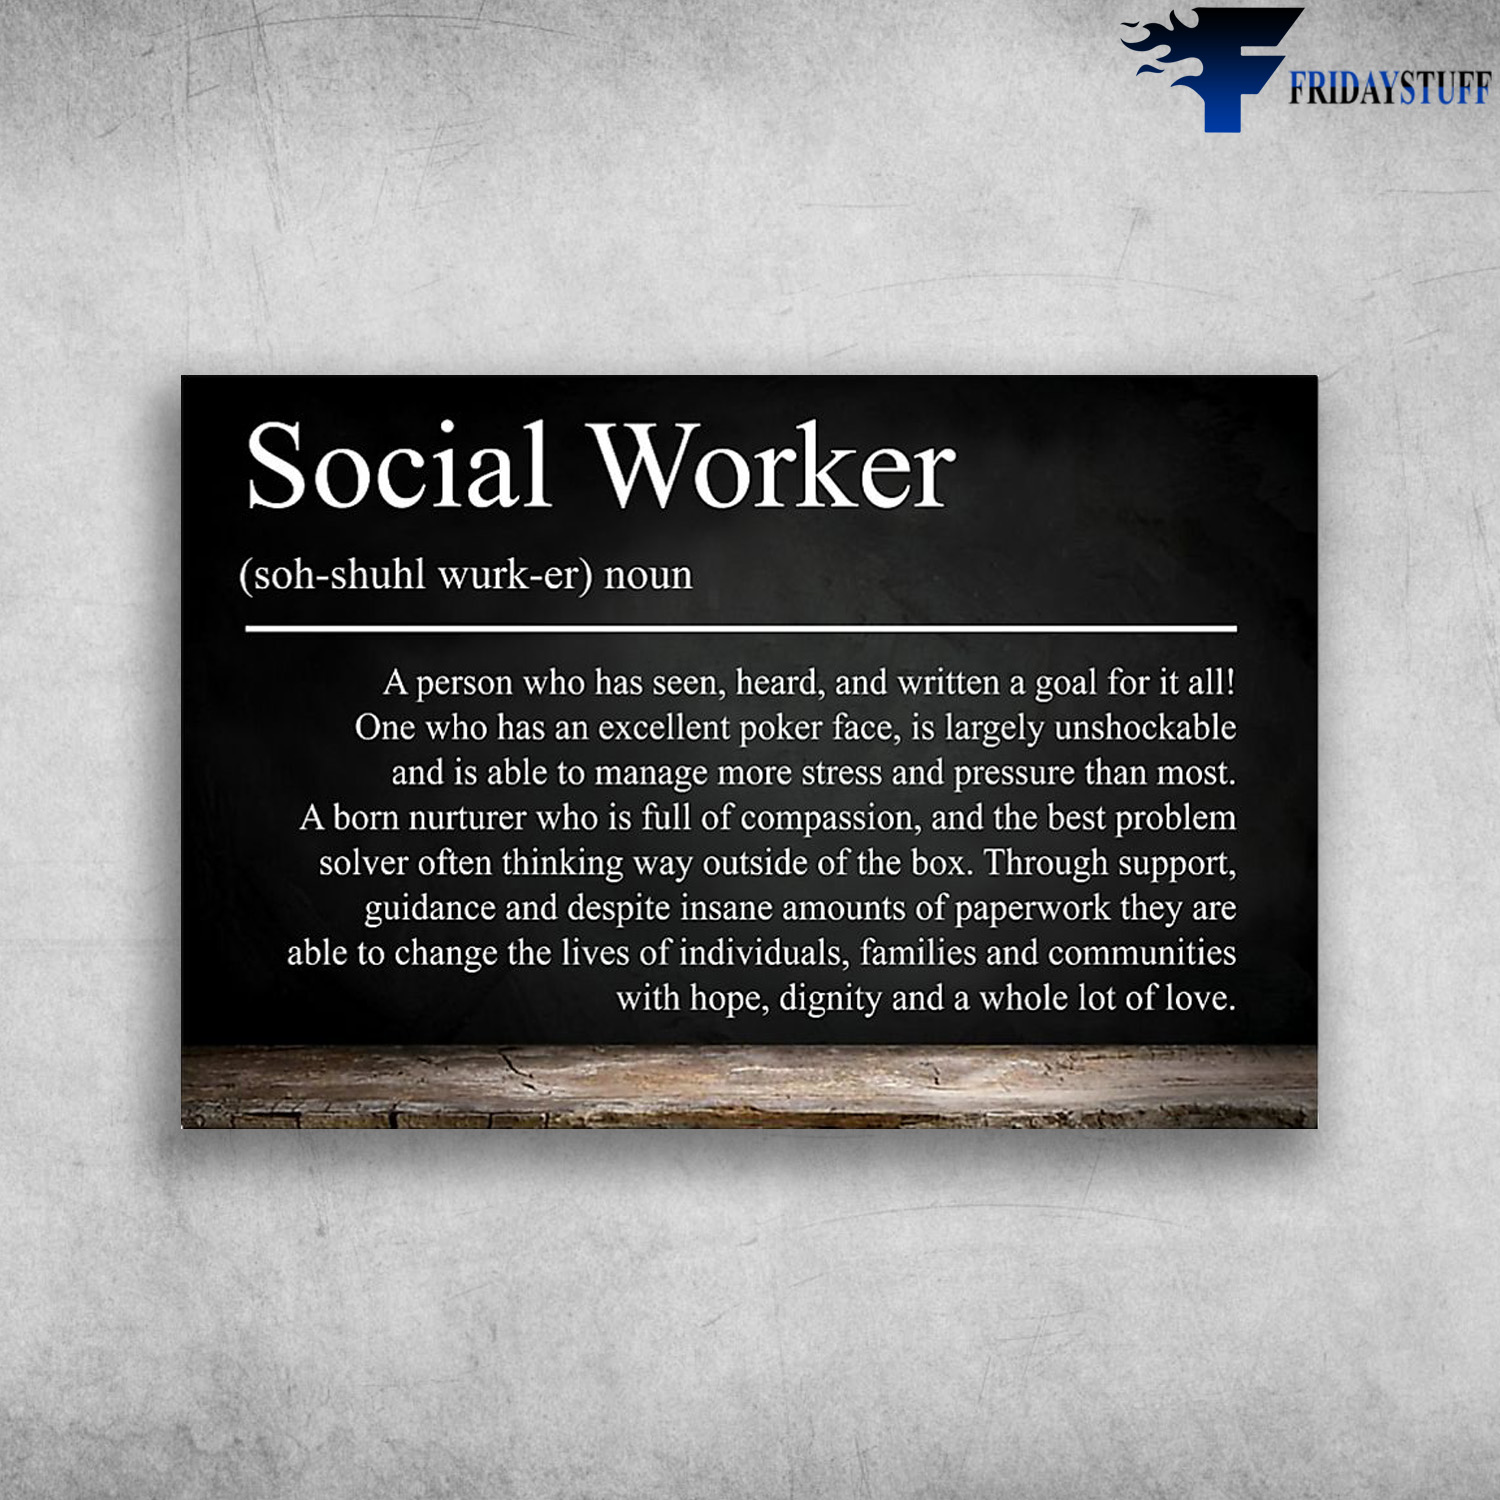 Social Worker - A Person Who Has Been, Heard, And Written A Goal For It All, One Who Has An Excellent Poker Face, Is Largely Inshockable And Able To Manage More Stress And Pressure Than Most, A Born Nurturer Who Is Full Of Compassion